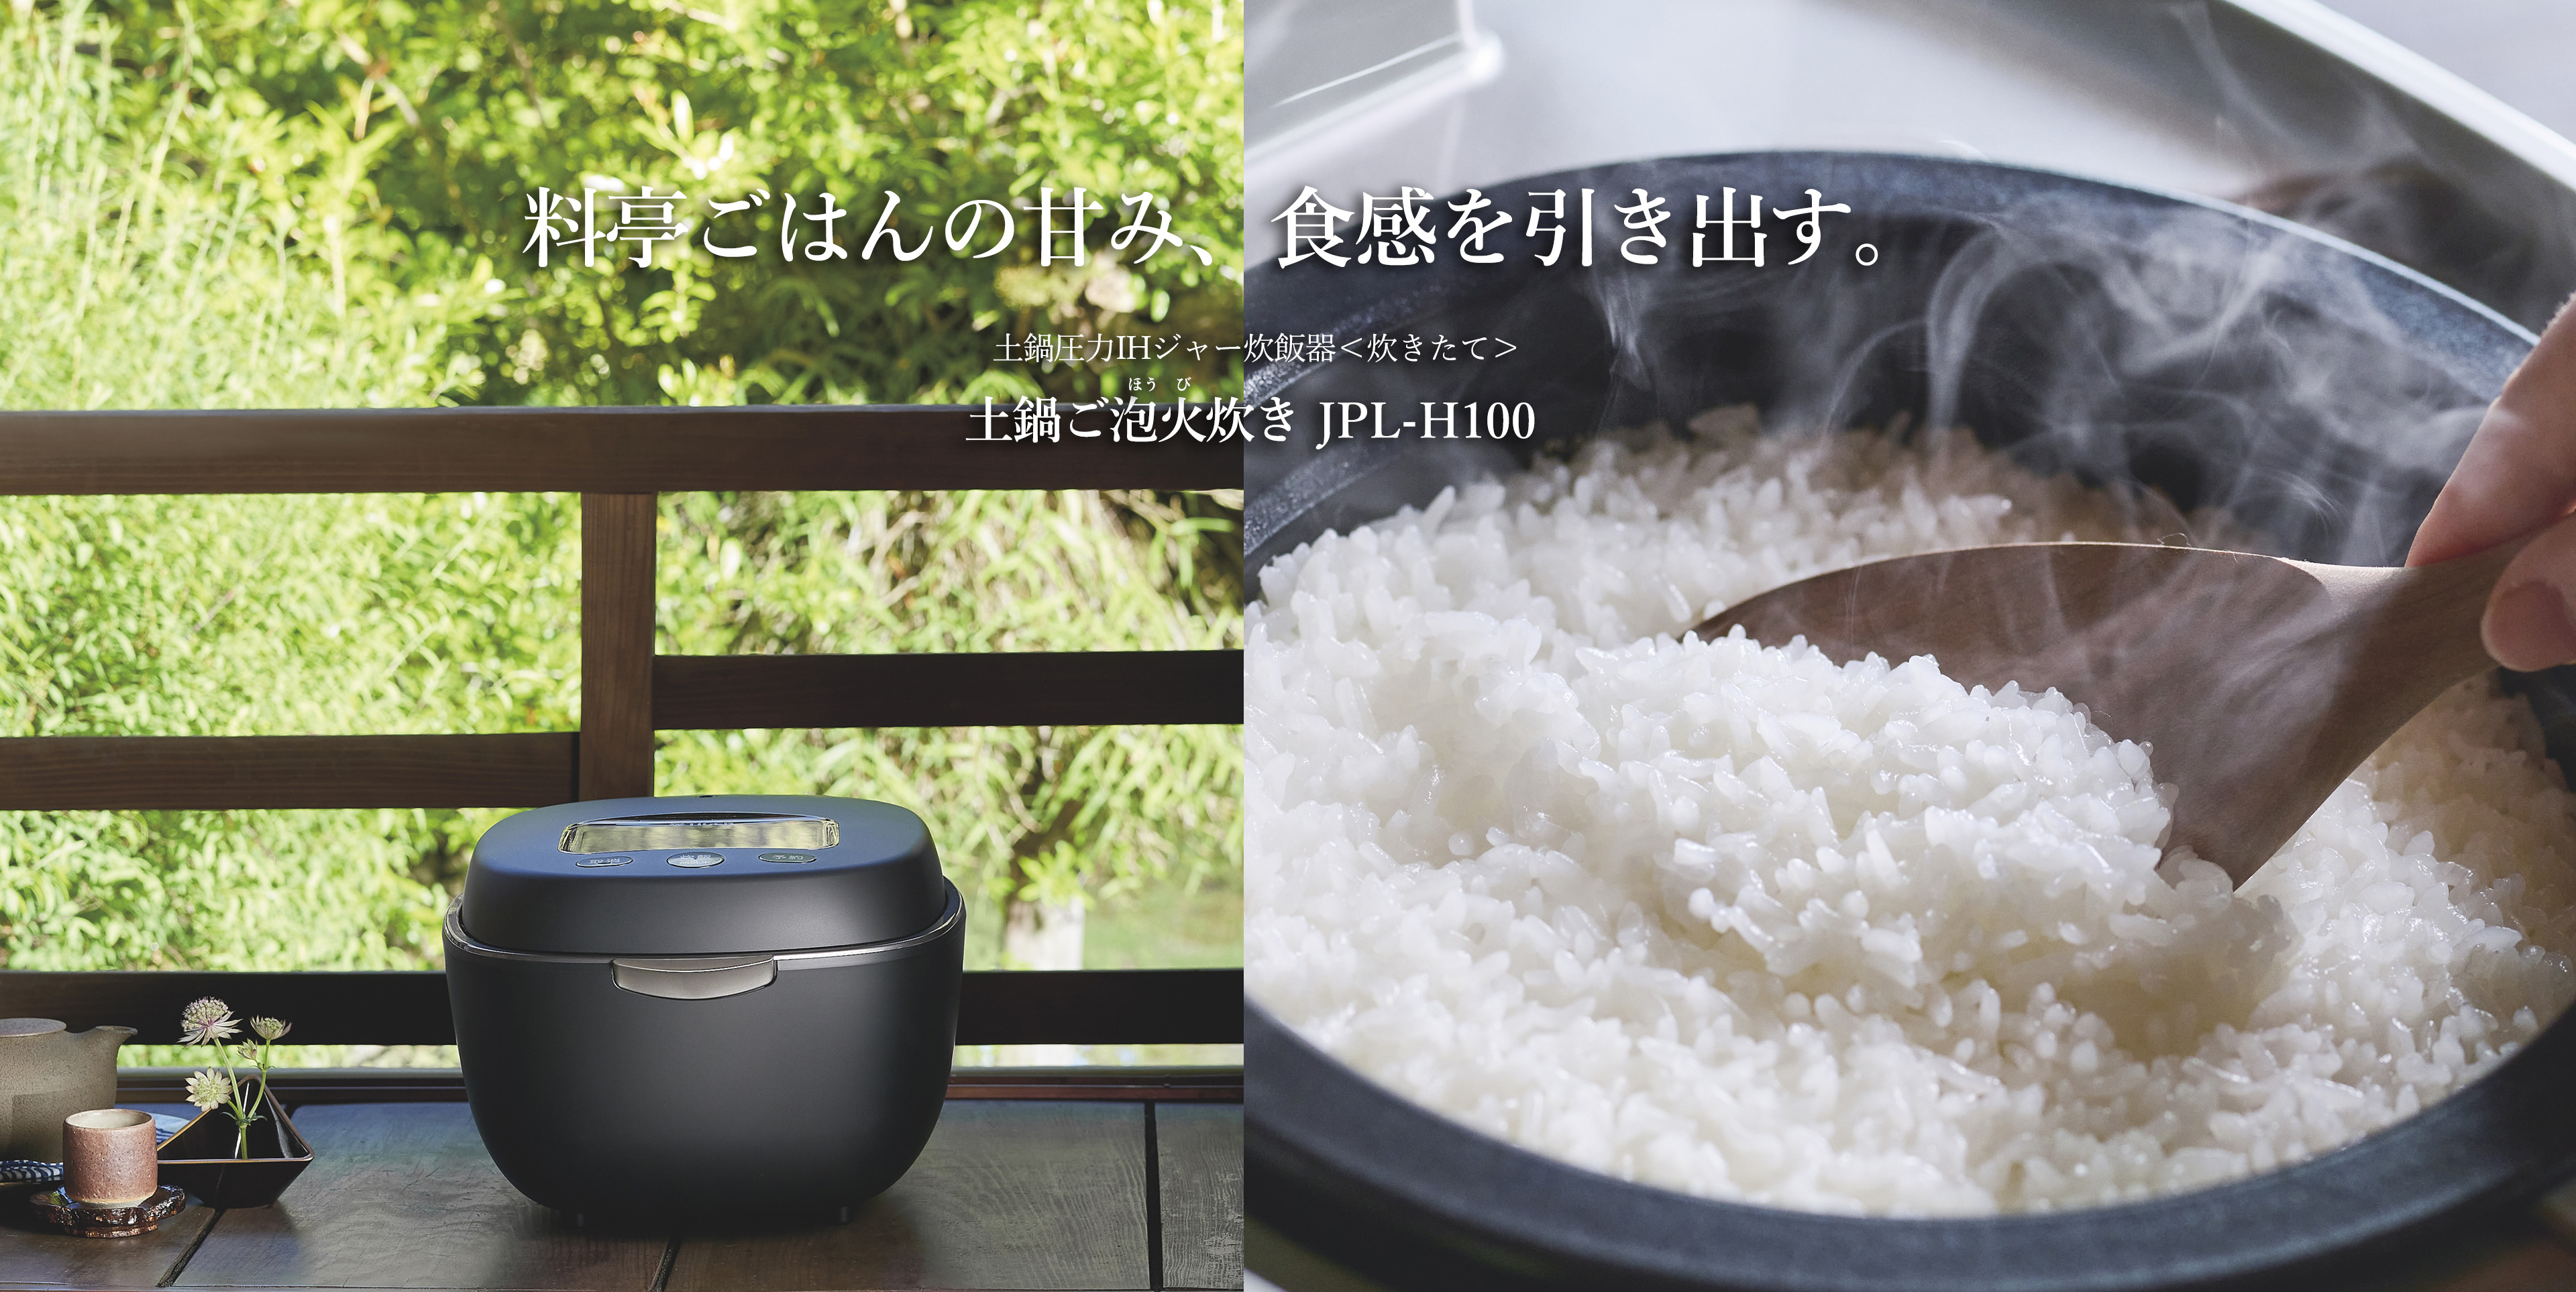 Brings out sweetness and springy texture of rice as if it was cooked at a Japanese-style luxury restaurant. Ceramic inner pot pressure IH rice cooker 〈炊きたて〉土鍋ご泡火炊き JPL-H100